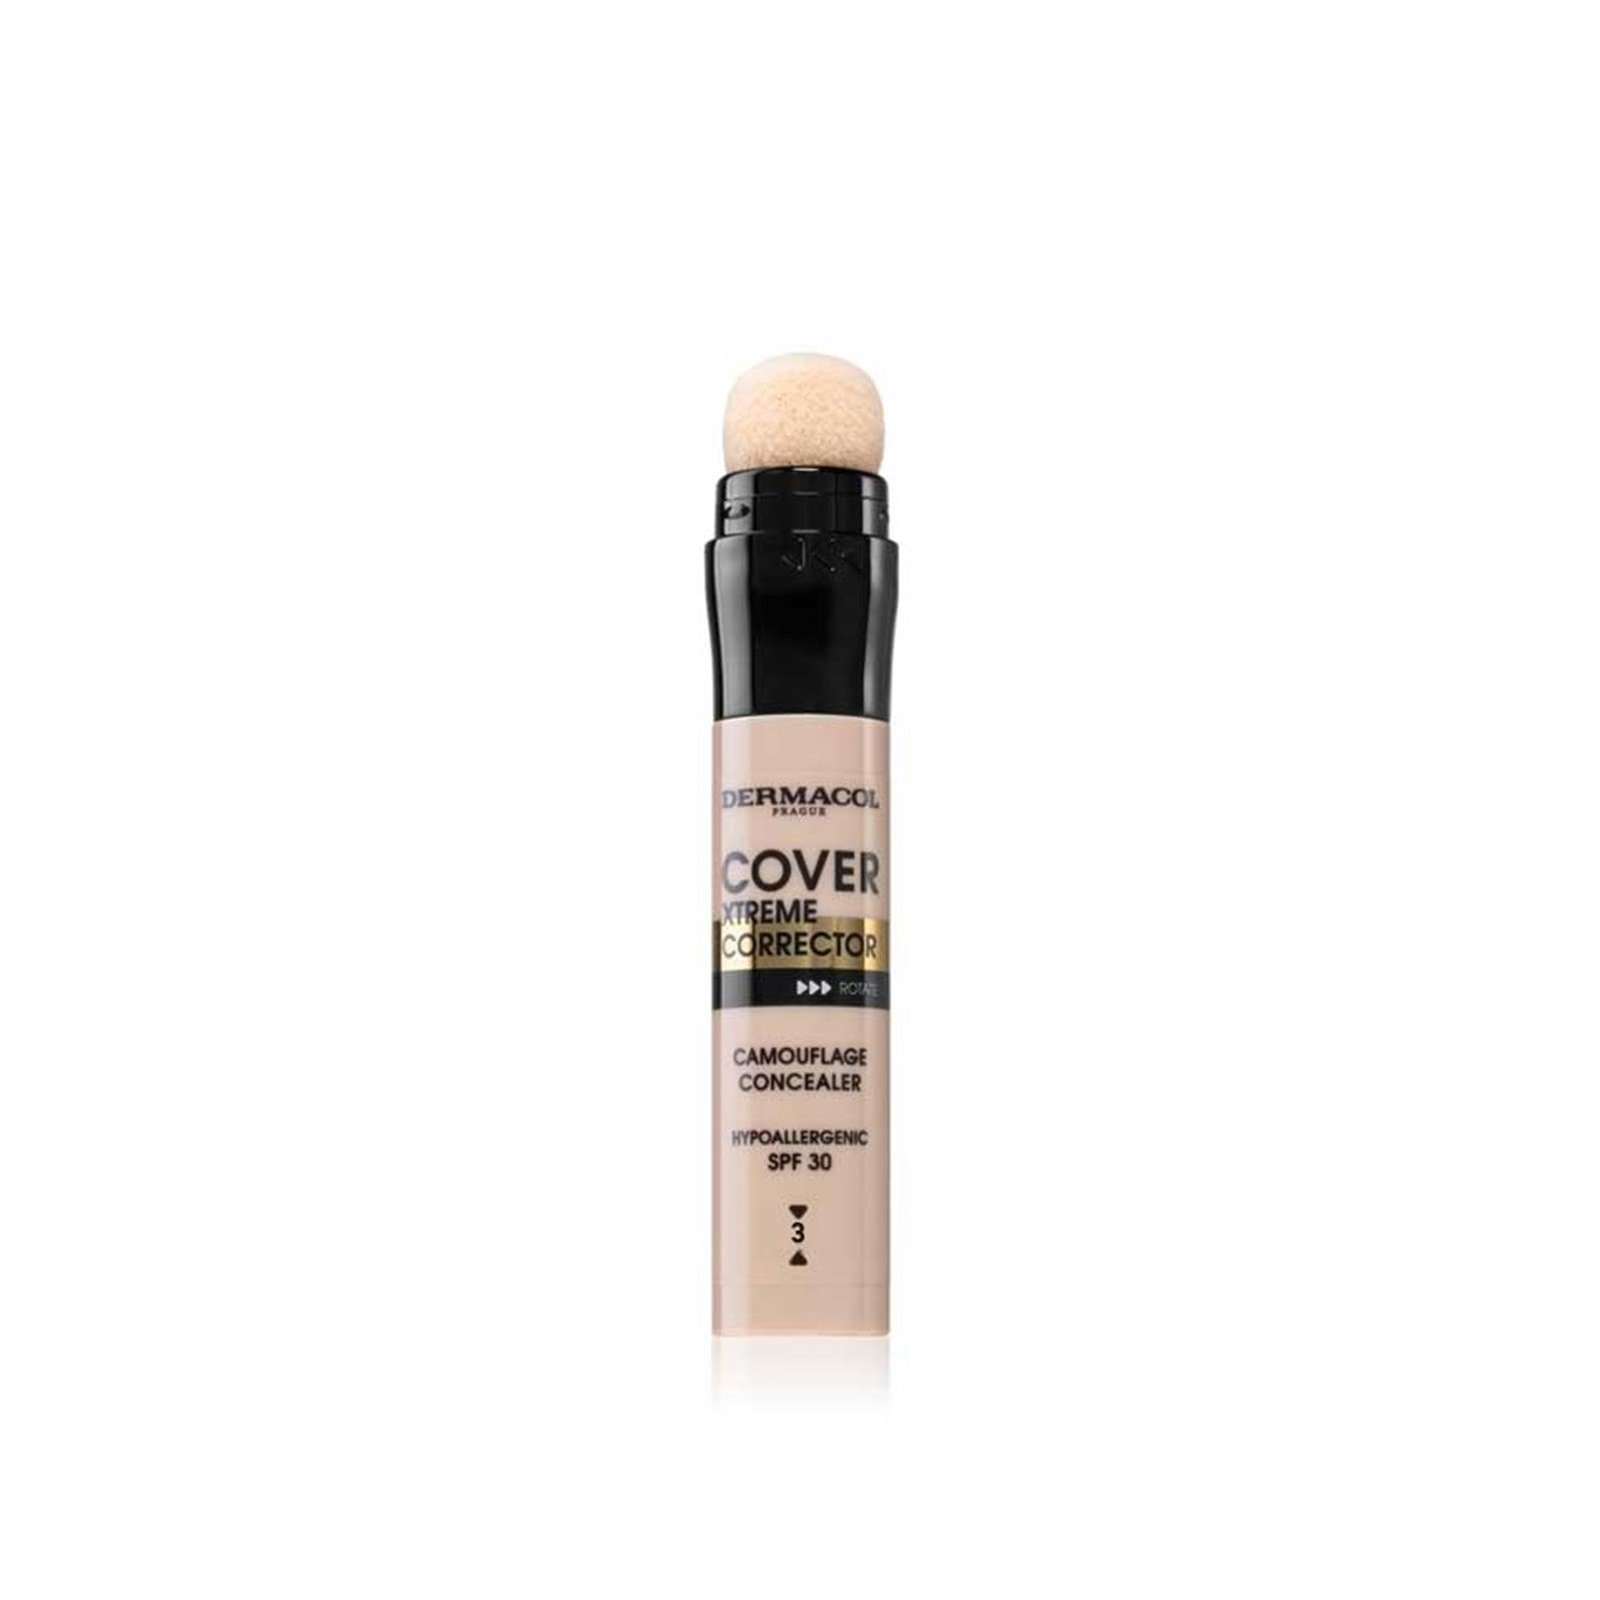 Dermacol Cover Xtreme Corrector 3 SPF30 8g